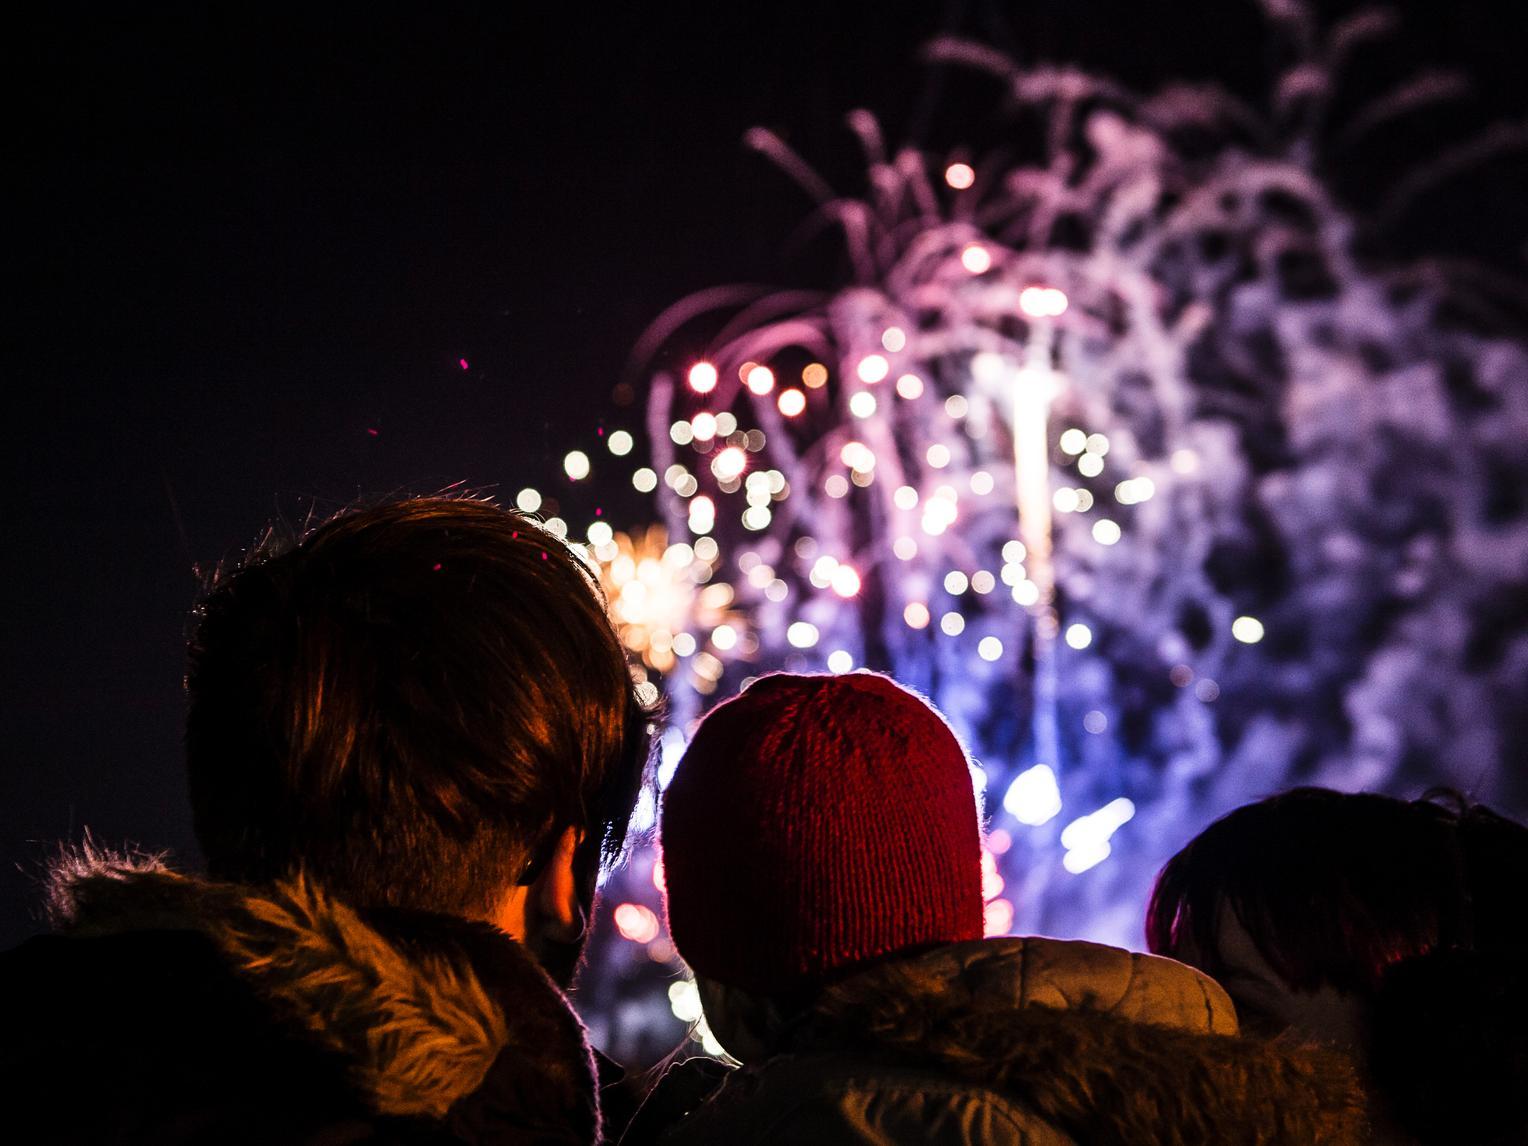 Held at 6pm, the fireworks will be choreographed to music around the school's natural amphitheatre site. Food, alcohol and soft drinks on offer. Cost: 8 pounds adults, 6 pounds children, 25 pounds family of four.